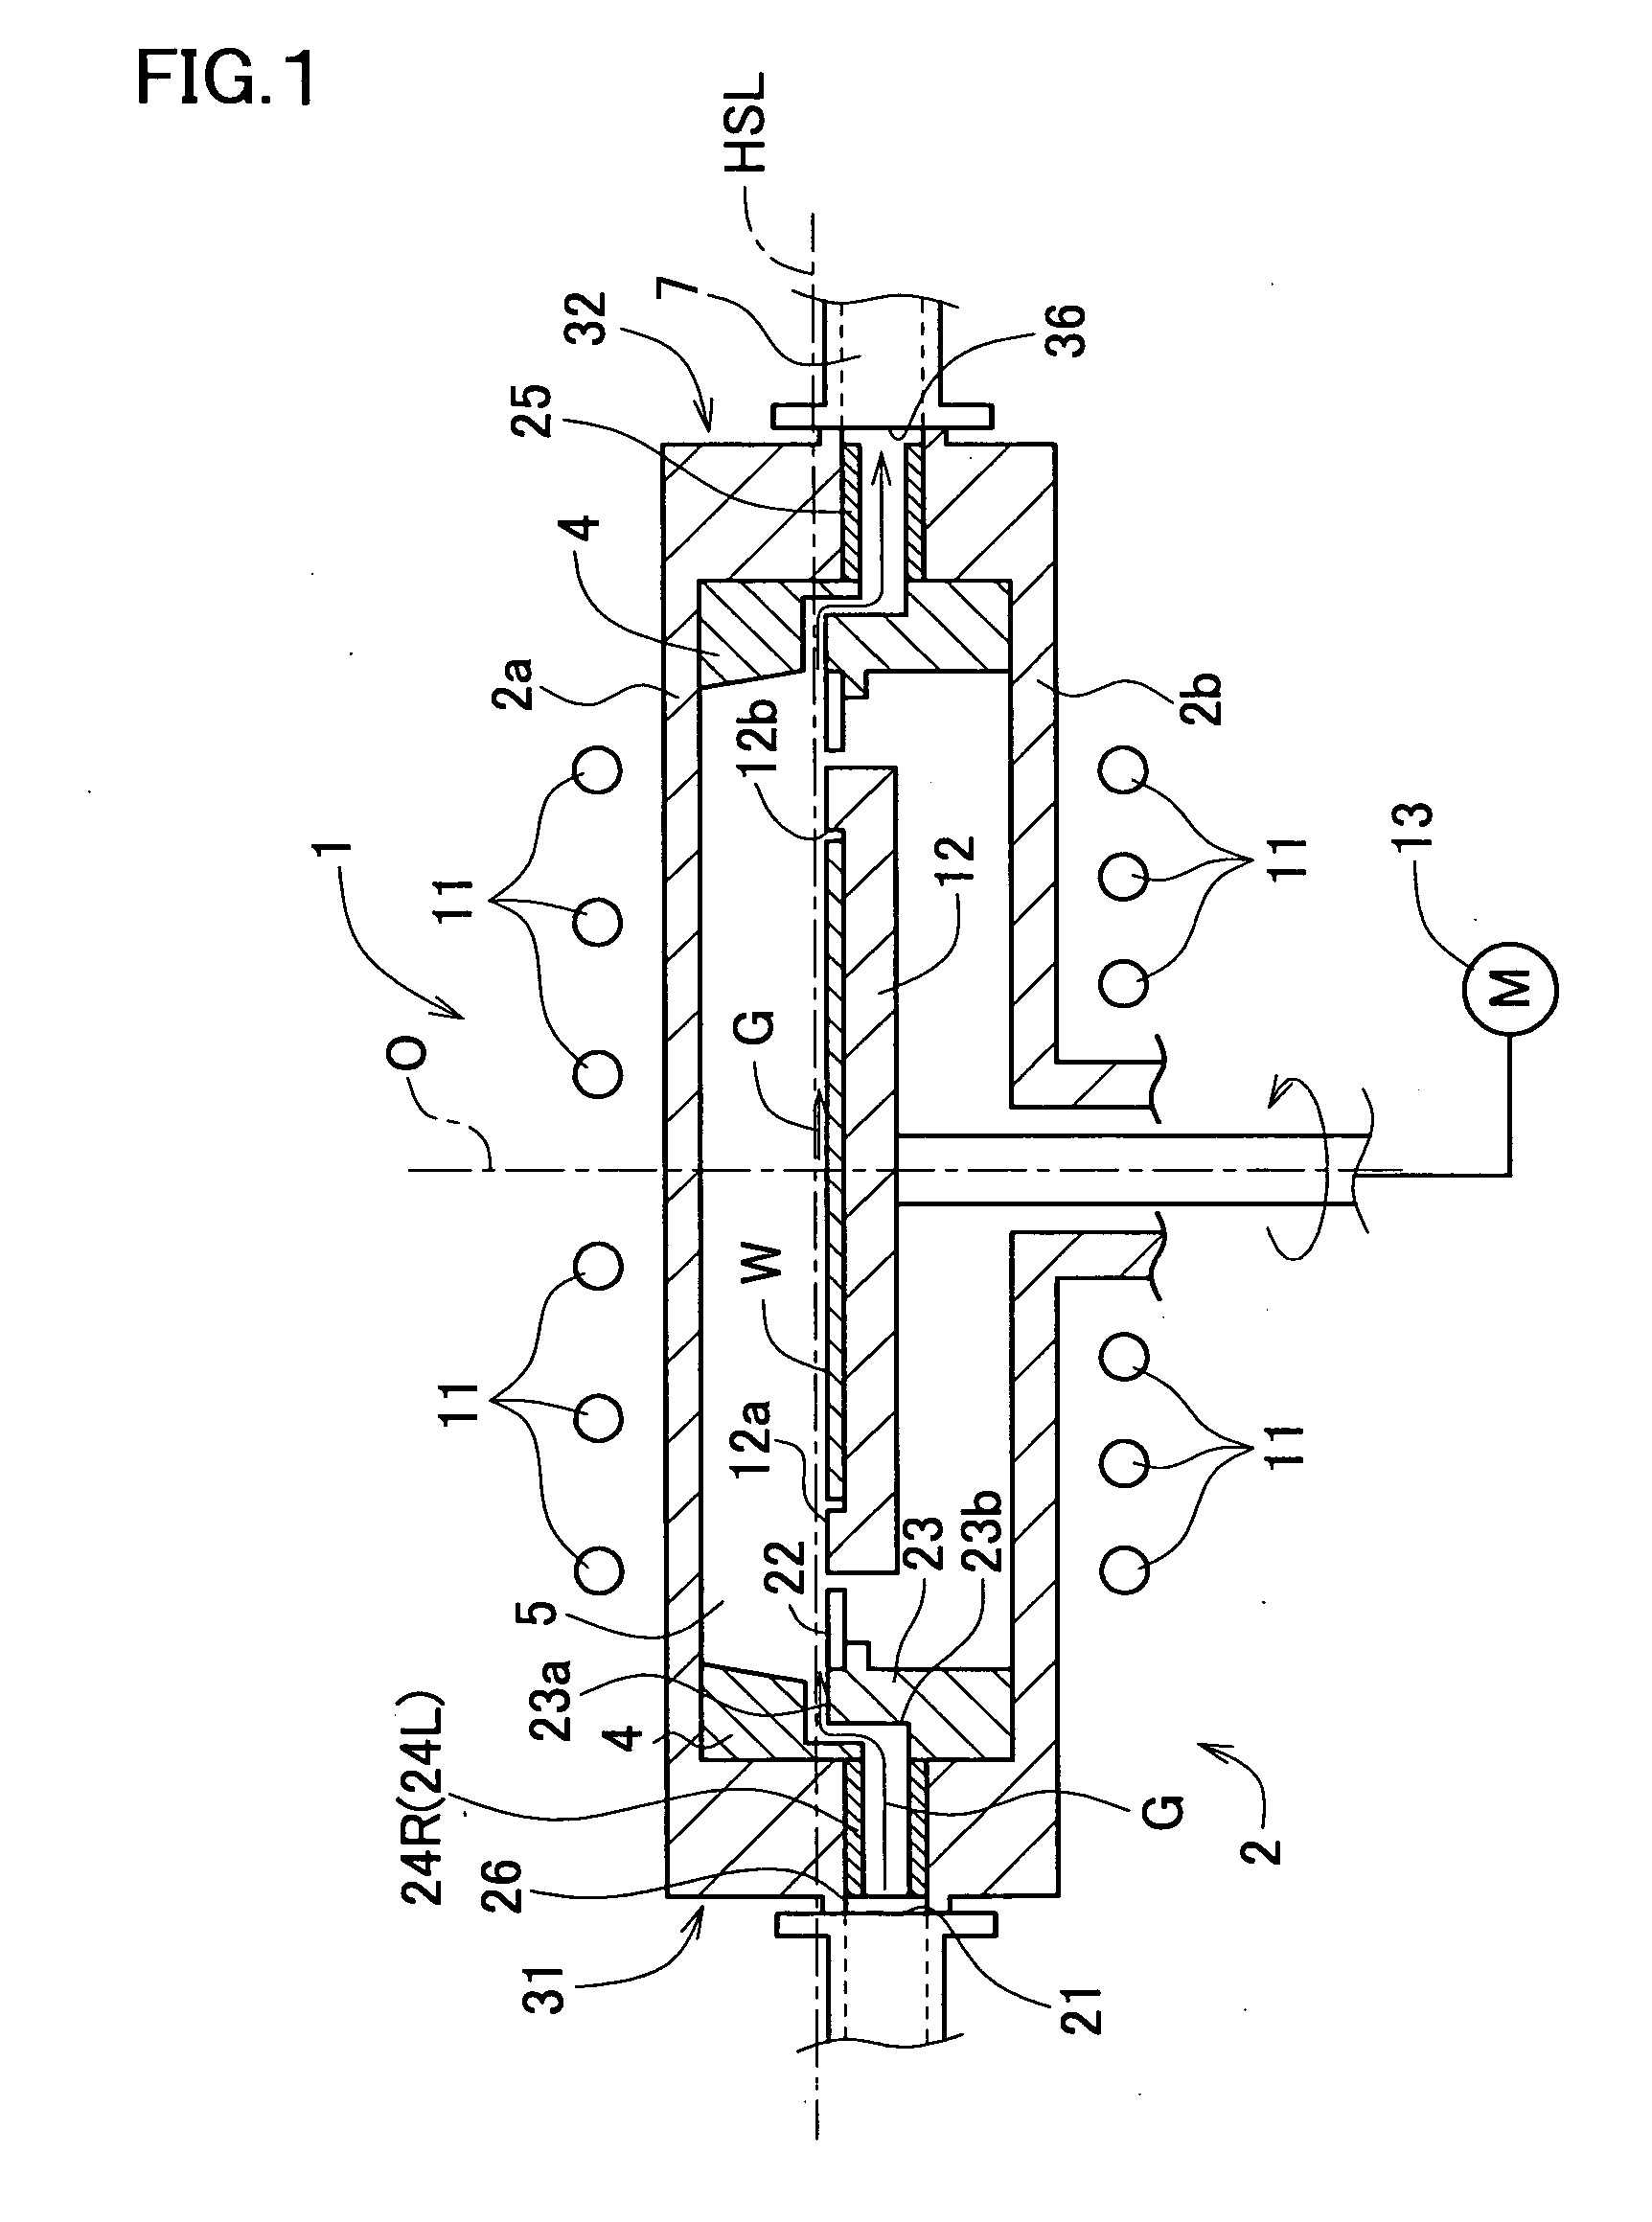 Vapor phase growth apparatus and method of fabricating epitaxial wafer